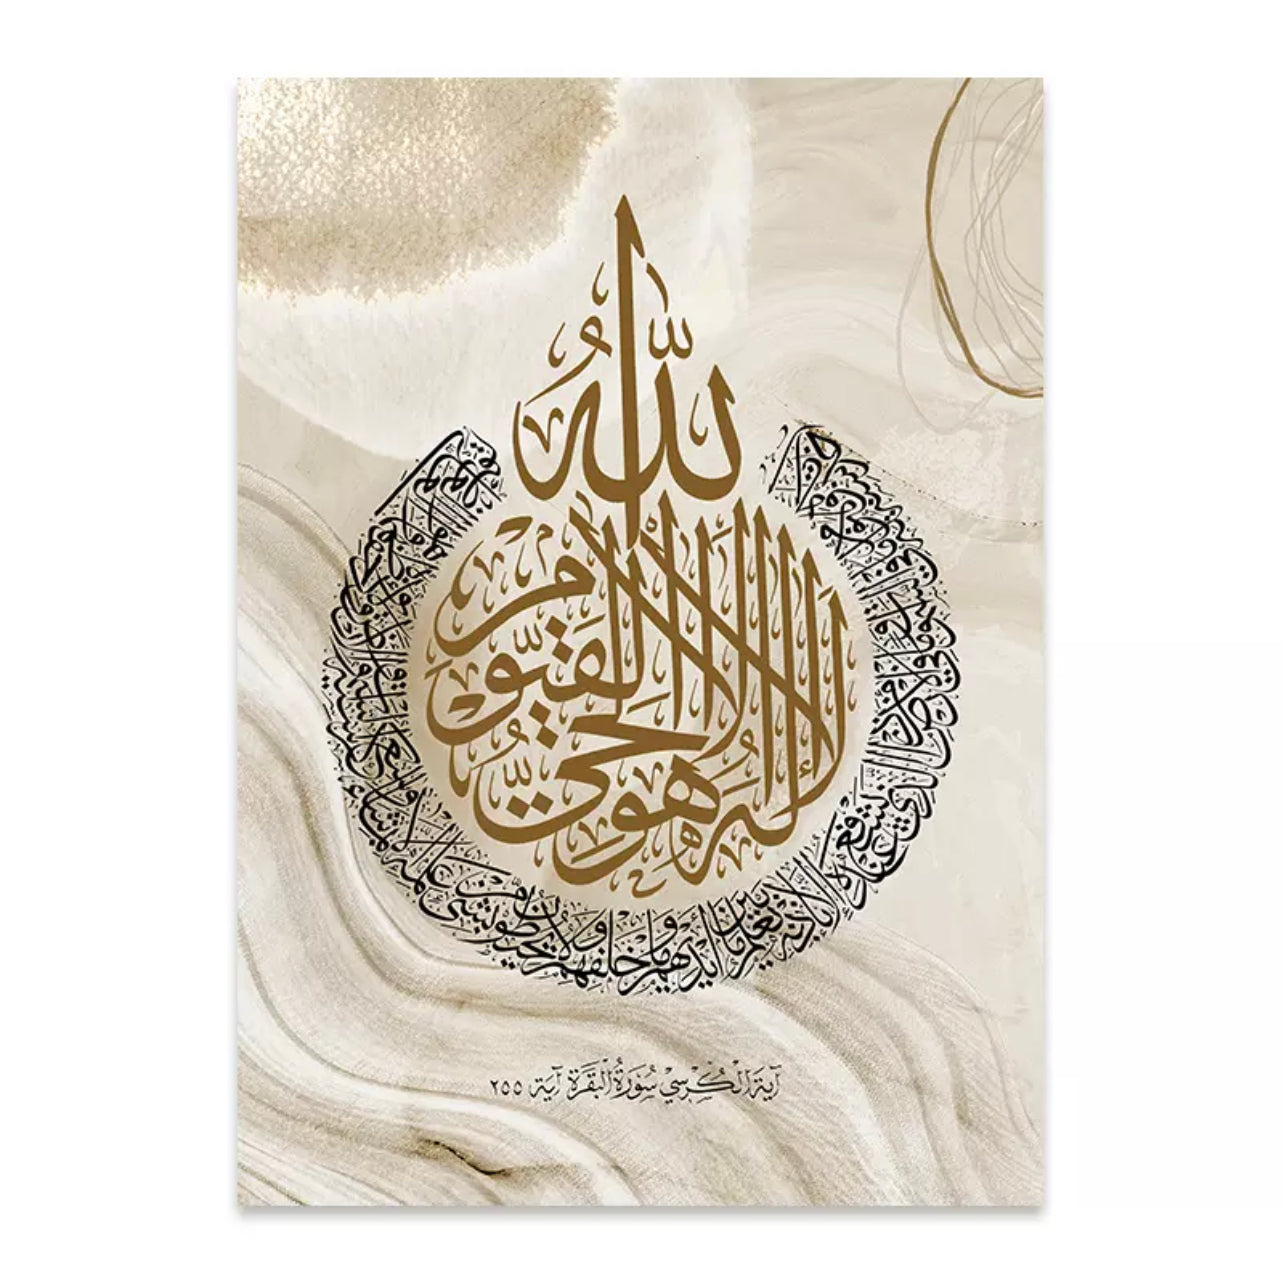 Beige Brown Black And Gold Bohemian Inspired Design With Islamic Calligraphy